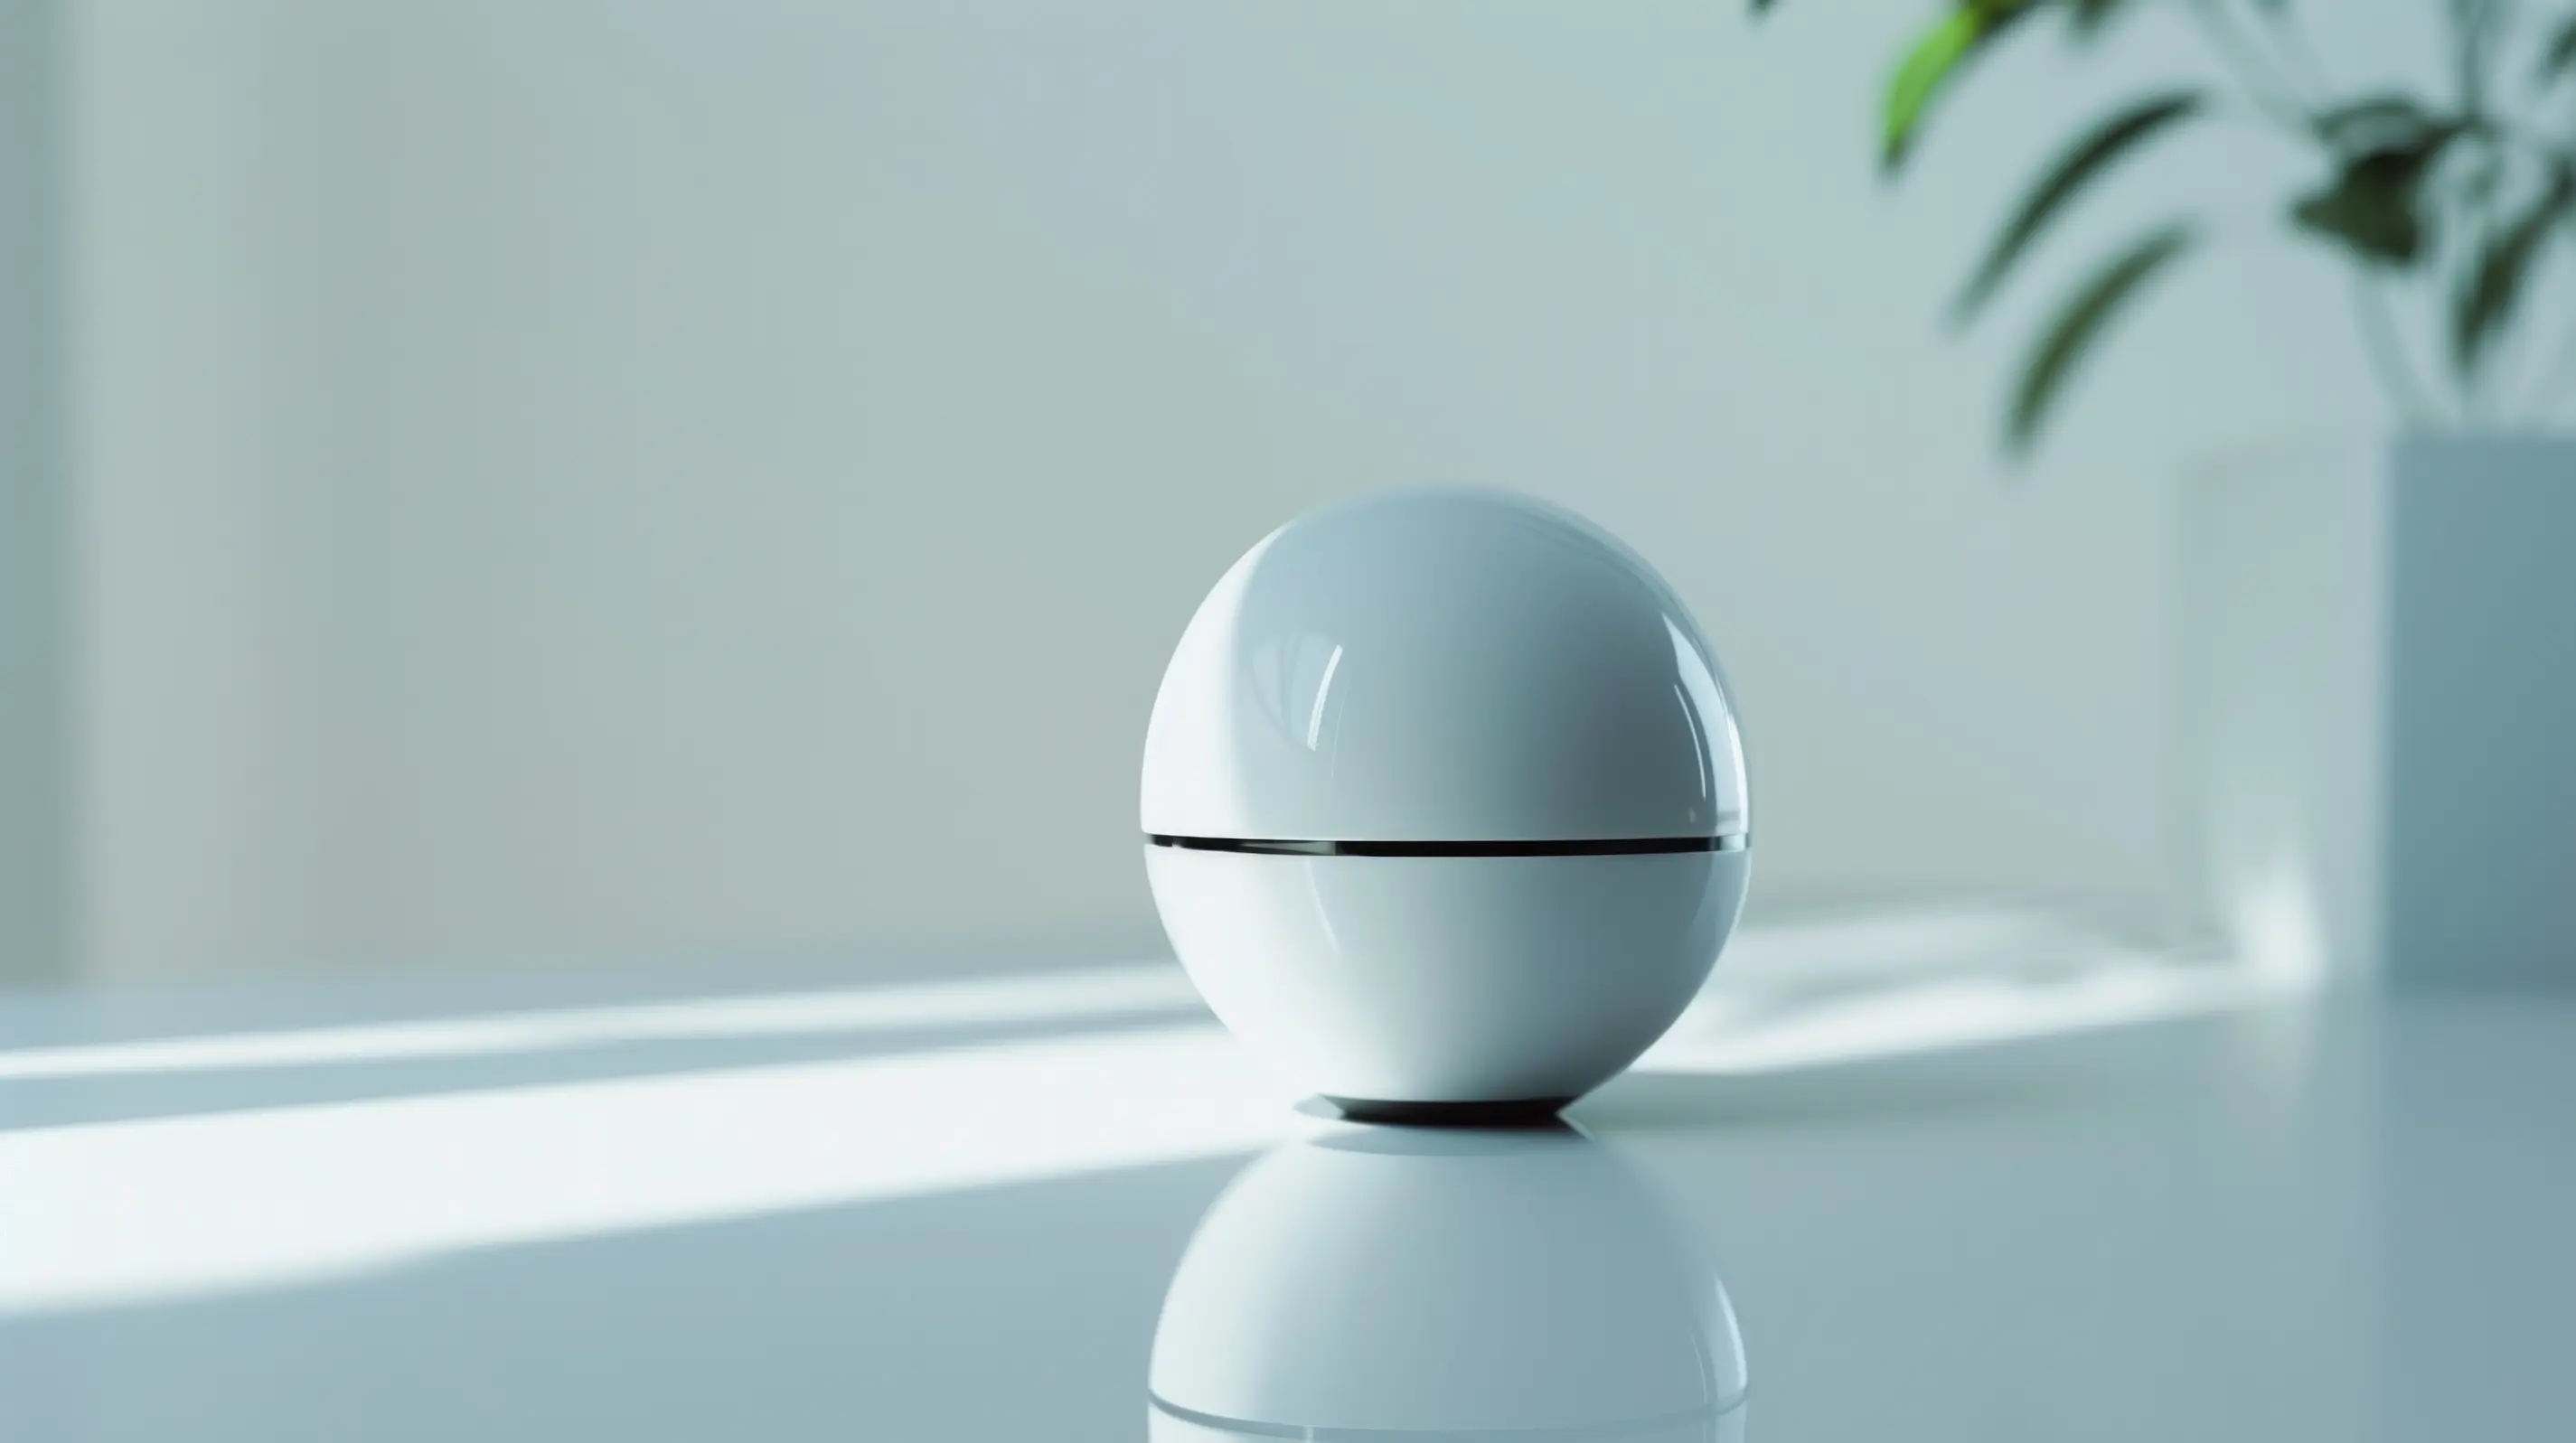 A white, spherical modern device.